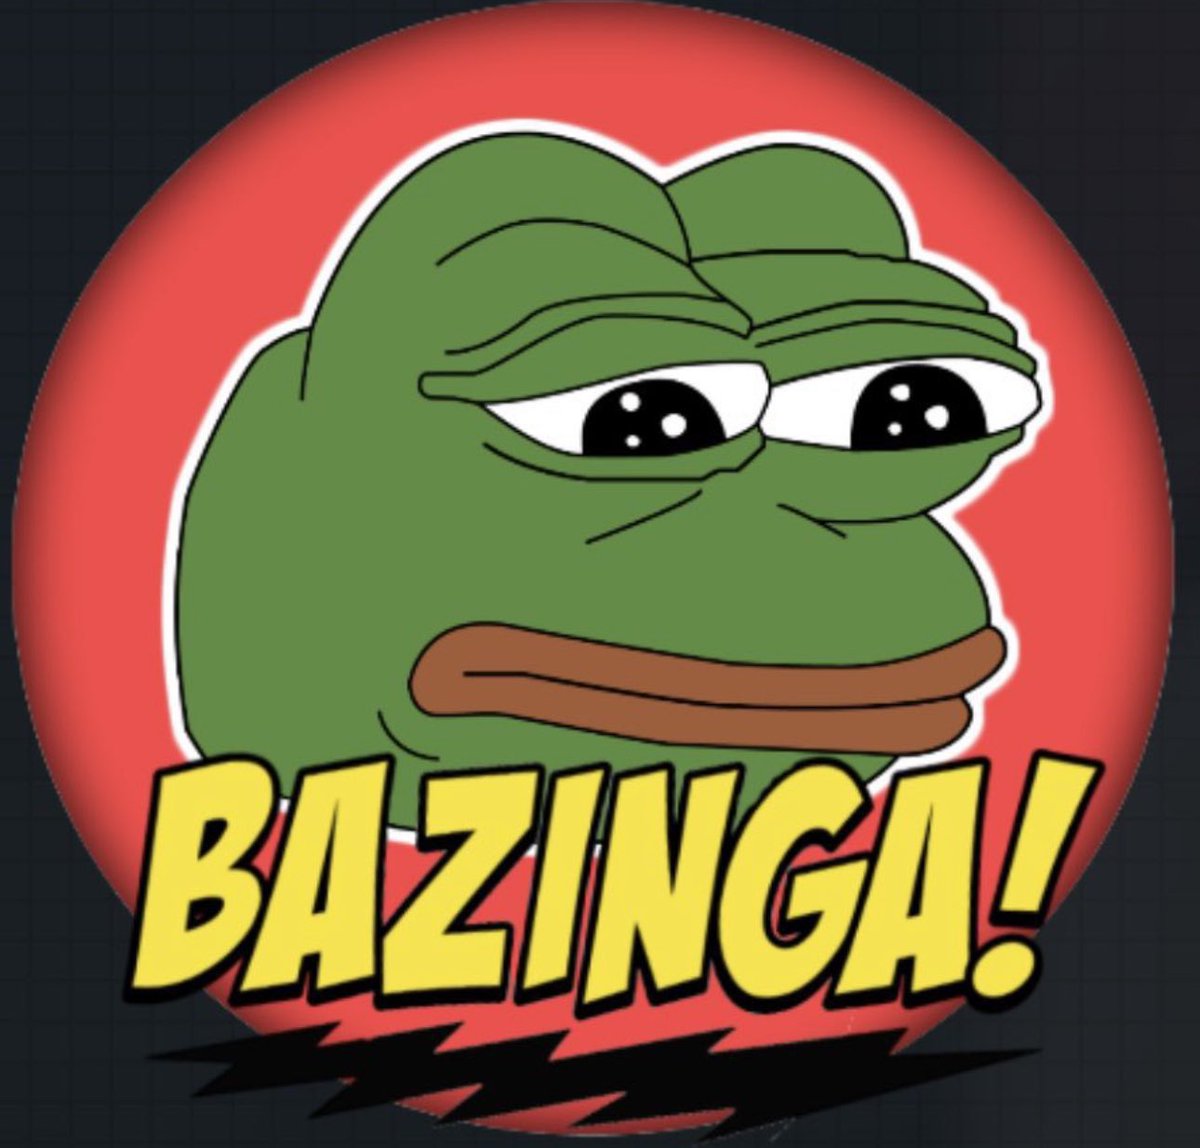 #bazinga is genius 

think about it for a second 

they make a competitor to pump.fun that is actually fun and enjoyable (game.com) and make it gamified so dev and insiders can’t snipe/bot the supply and dump

BILLIONS.